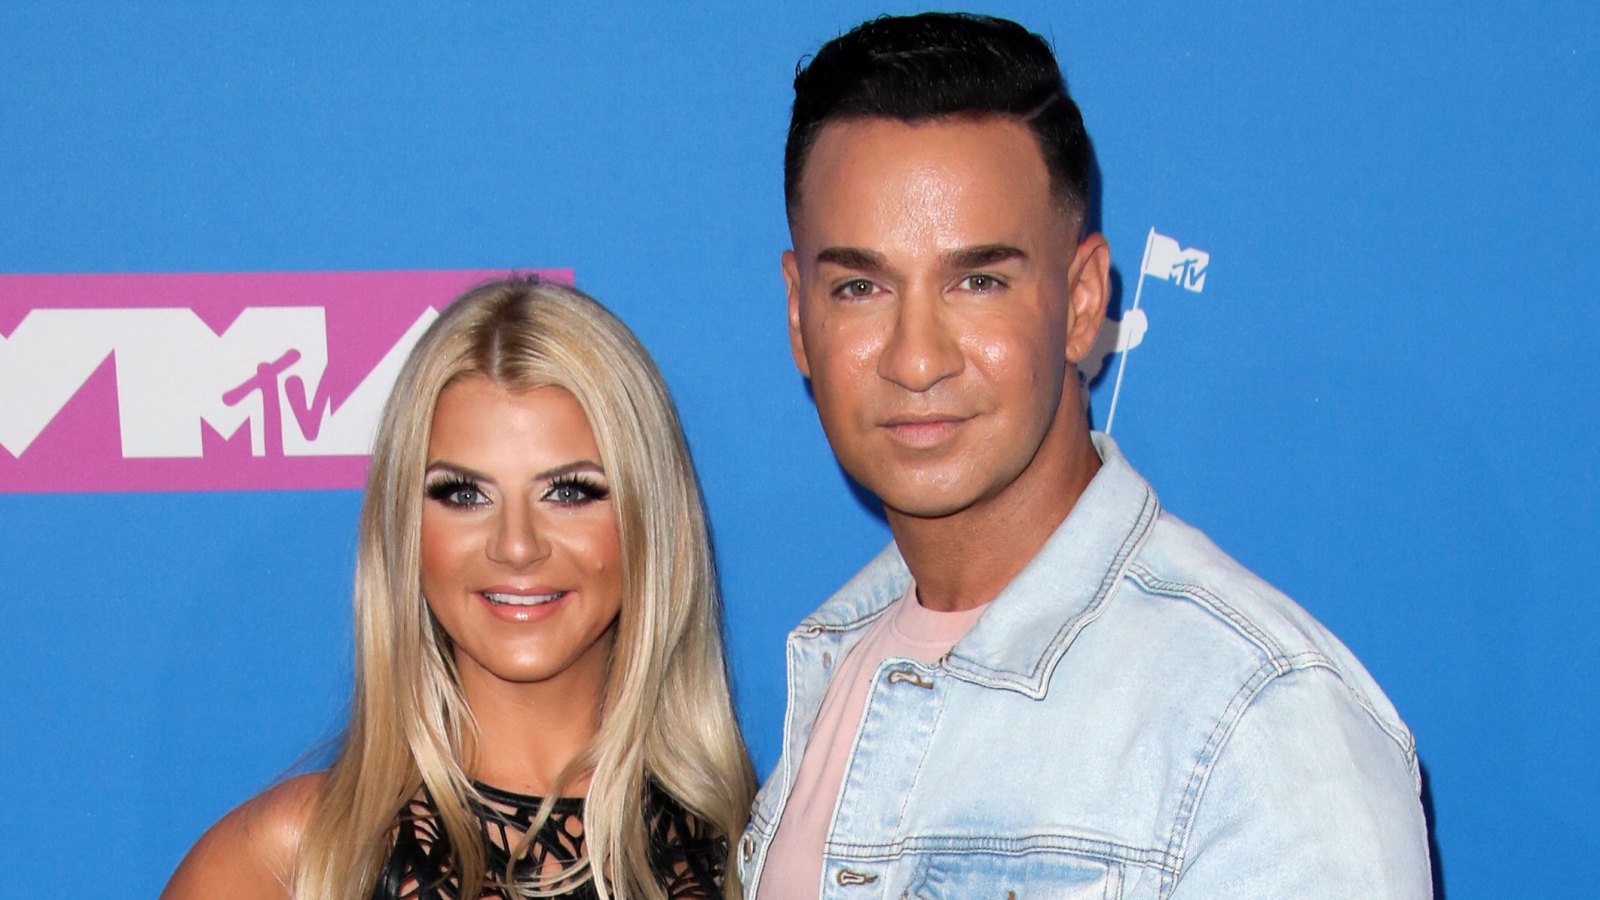 Mike The Situation Celebrates Anniversary After Prison Release